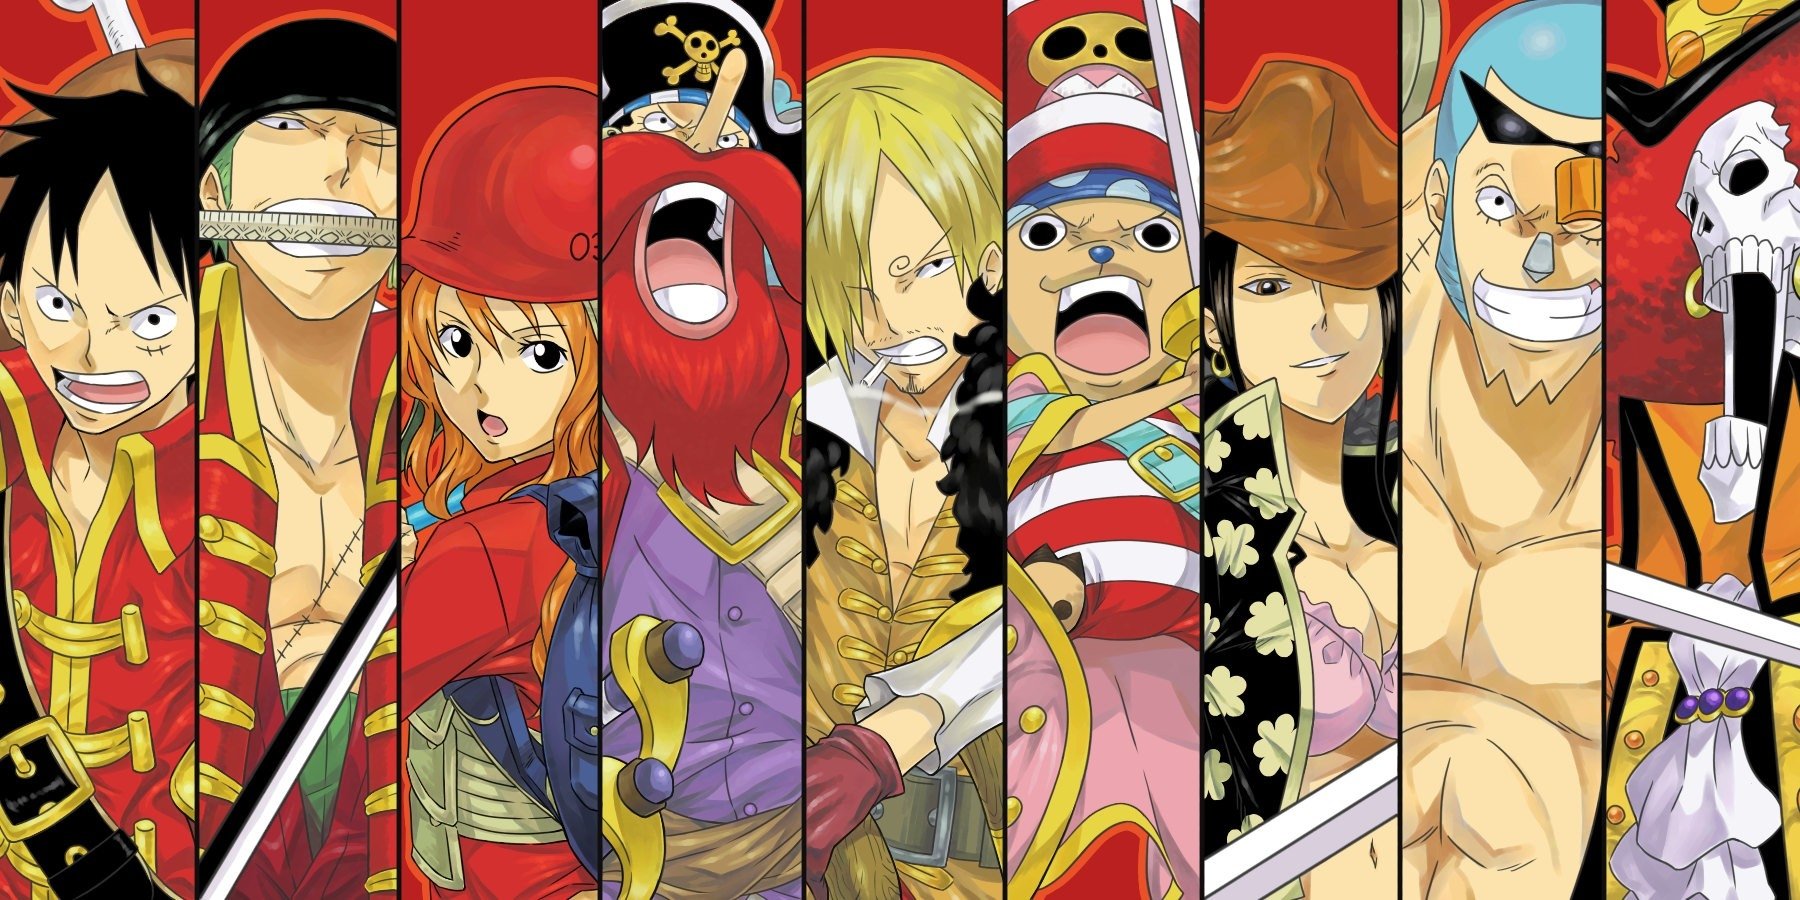 Monkey D. Luffy's crew Wallpaper and Background Image | 1800x900 | ID luffy whole crew wallpaper